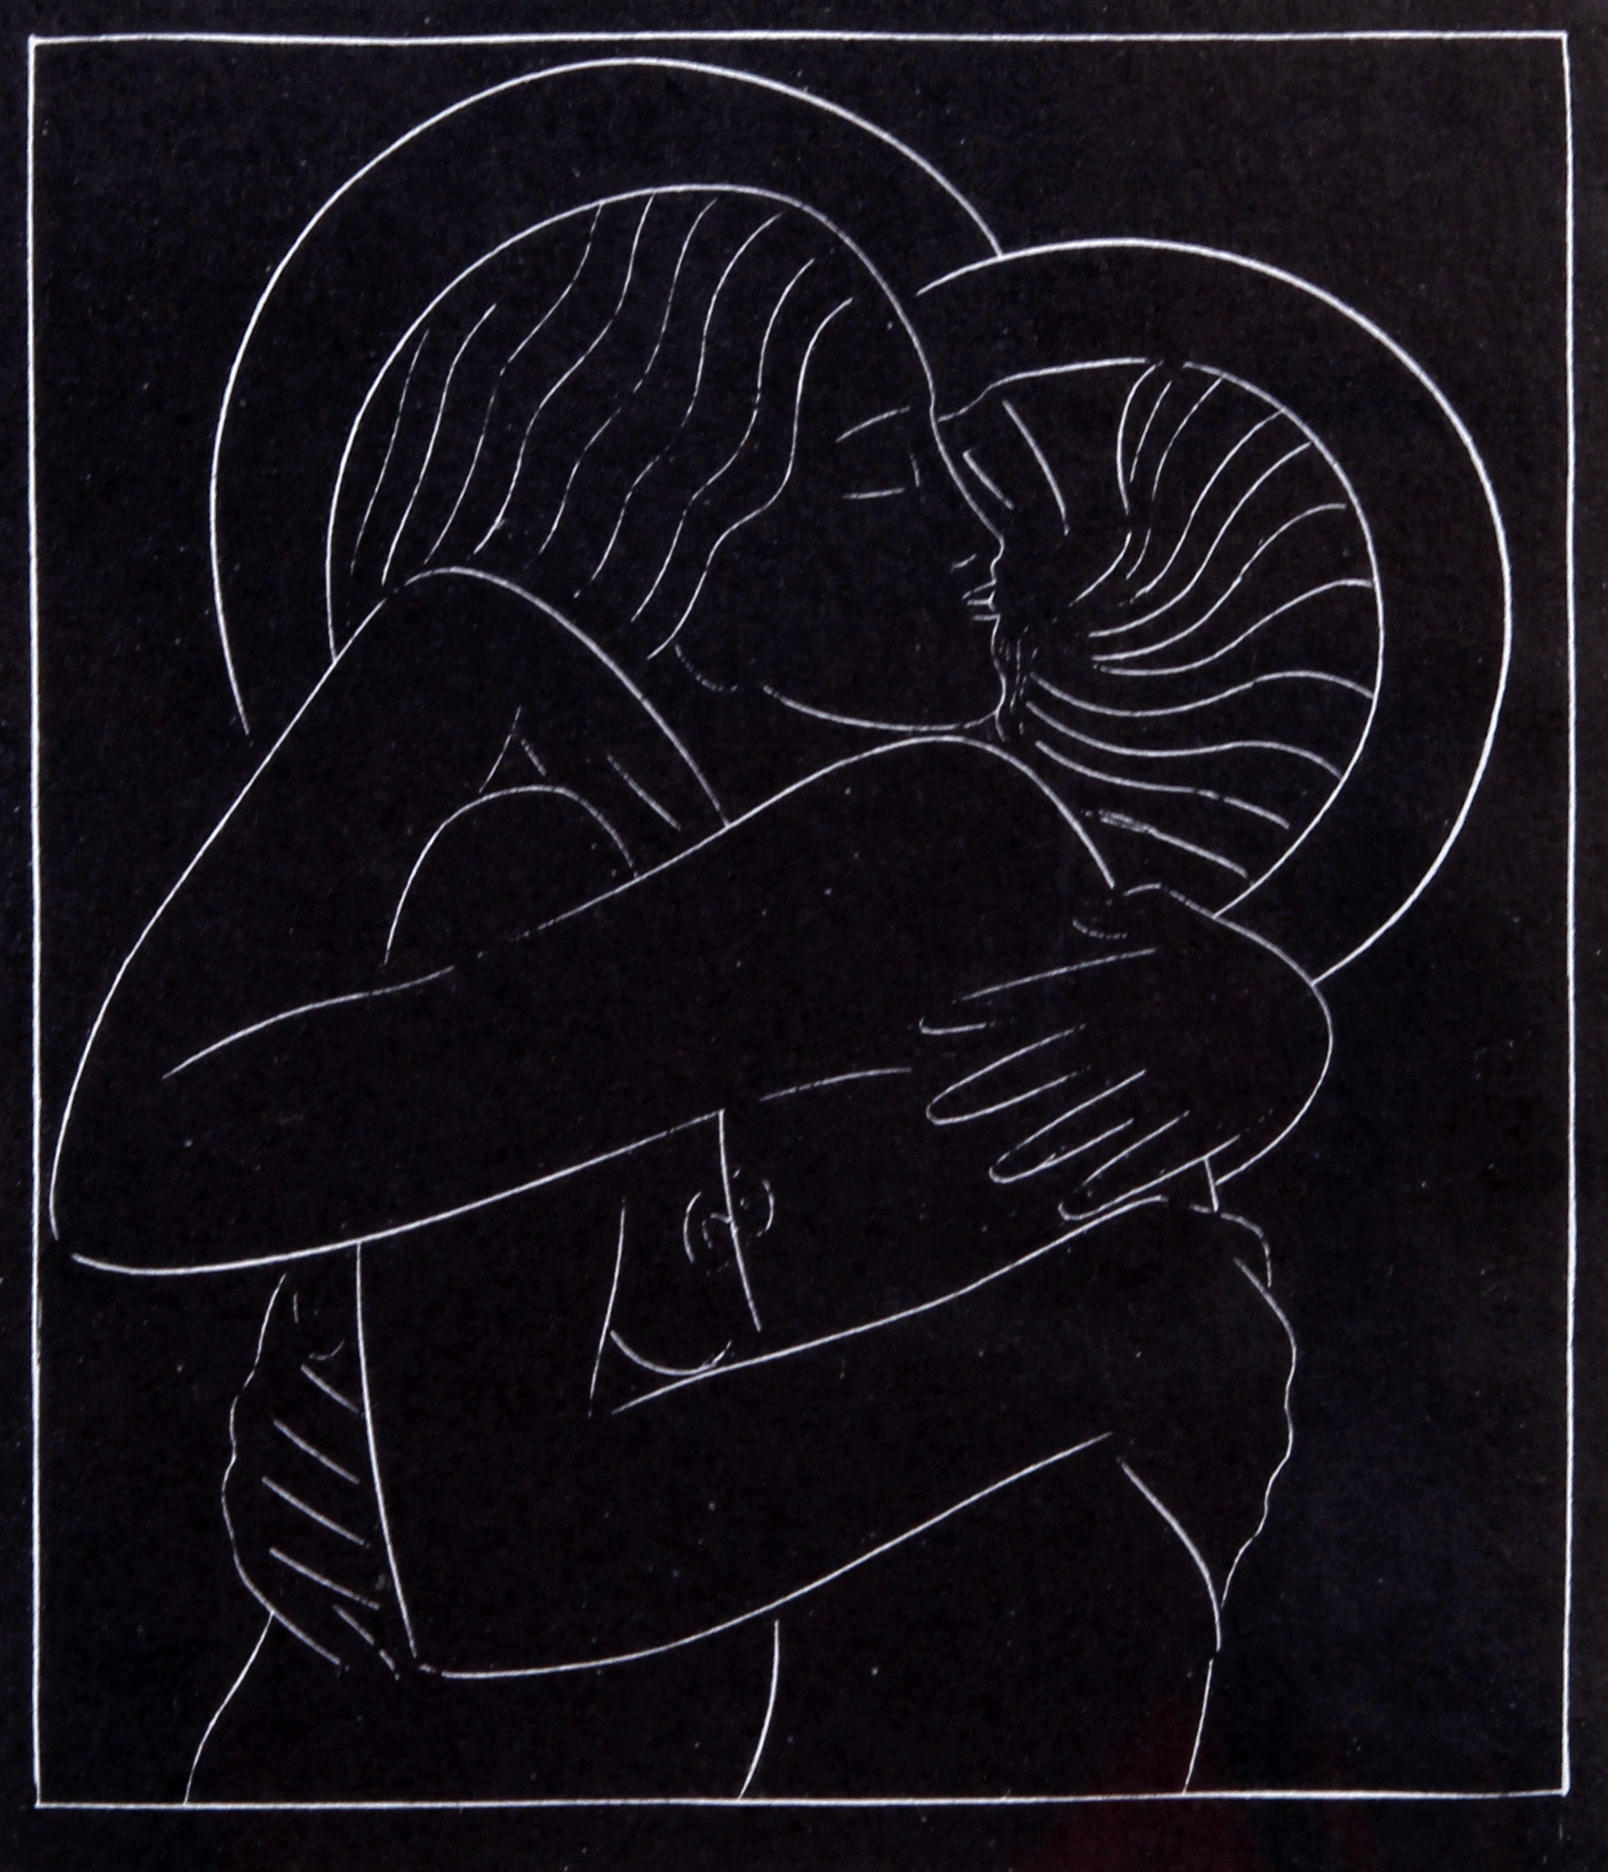 Divine Lovers by Eric Gill